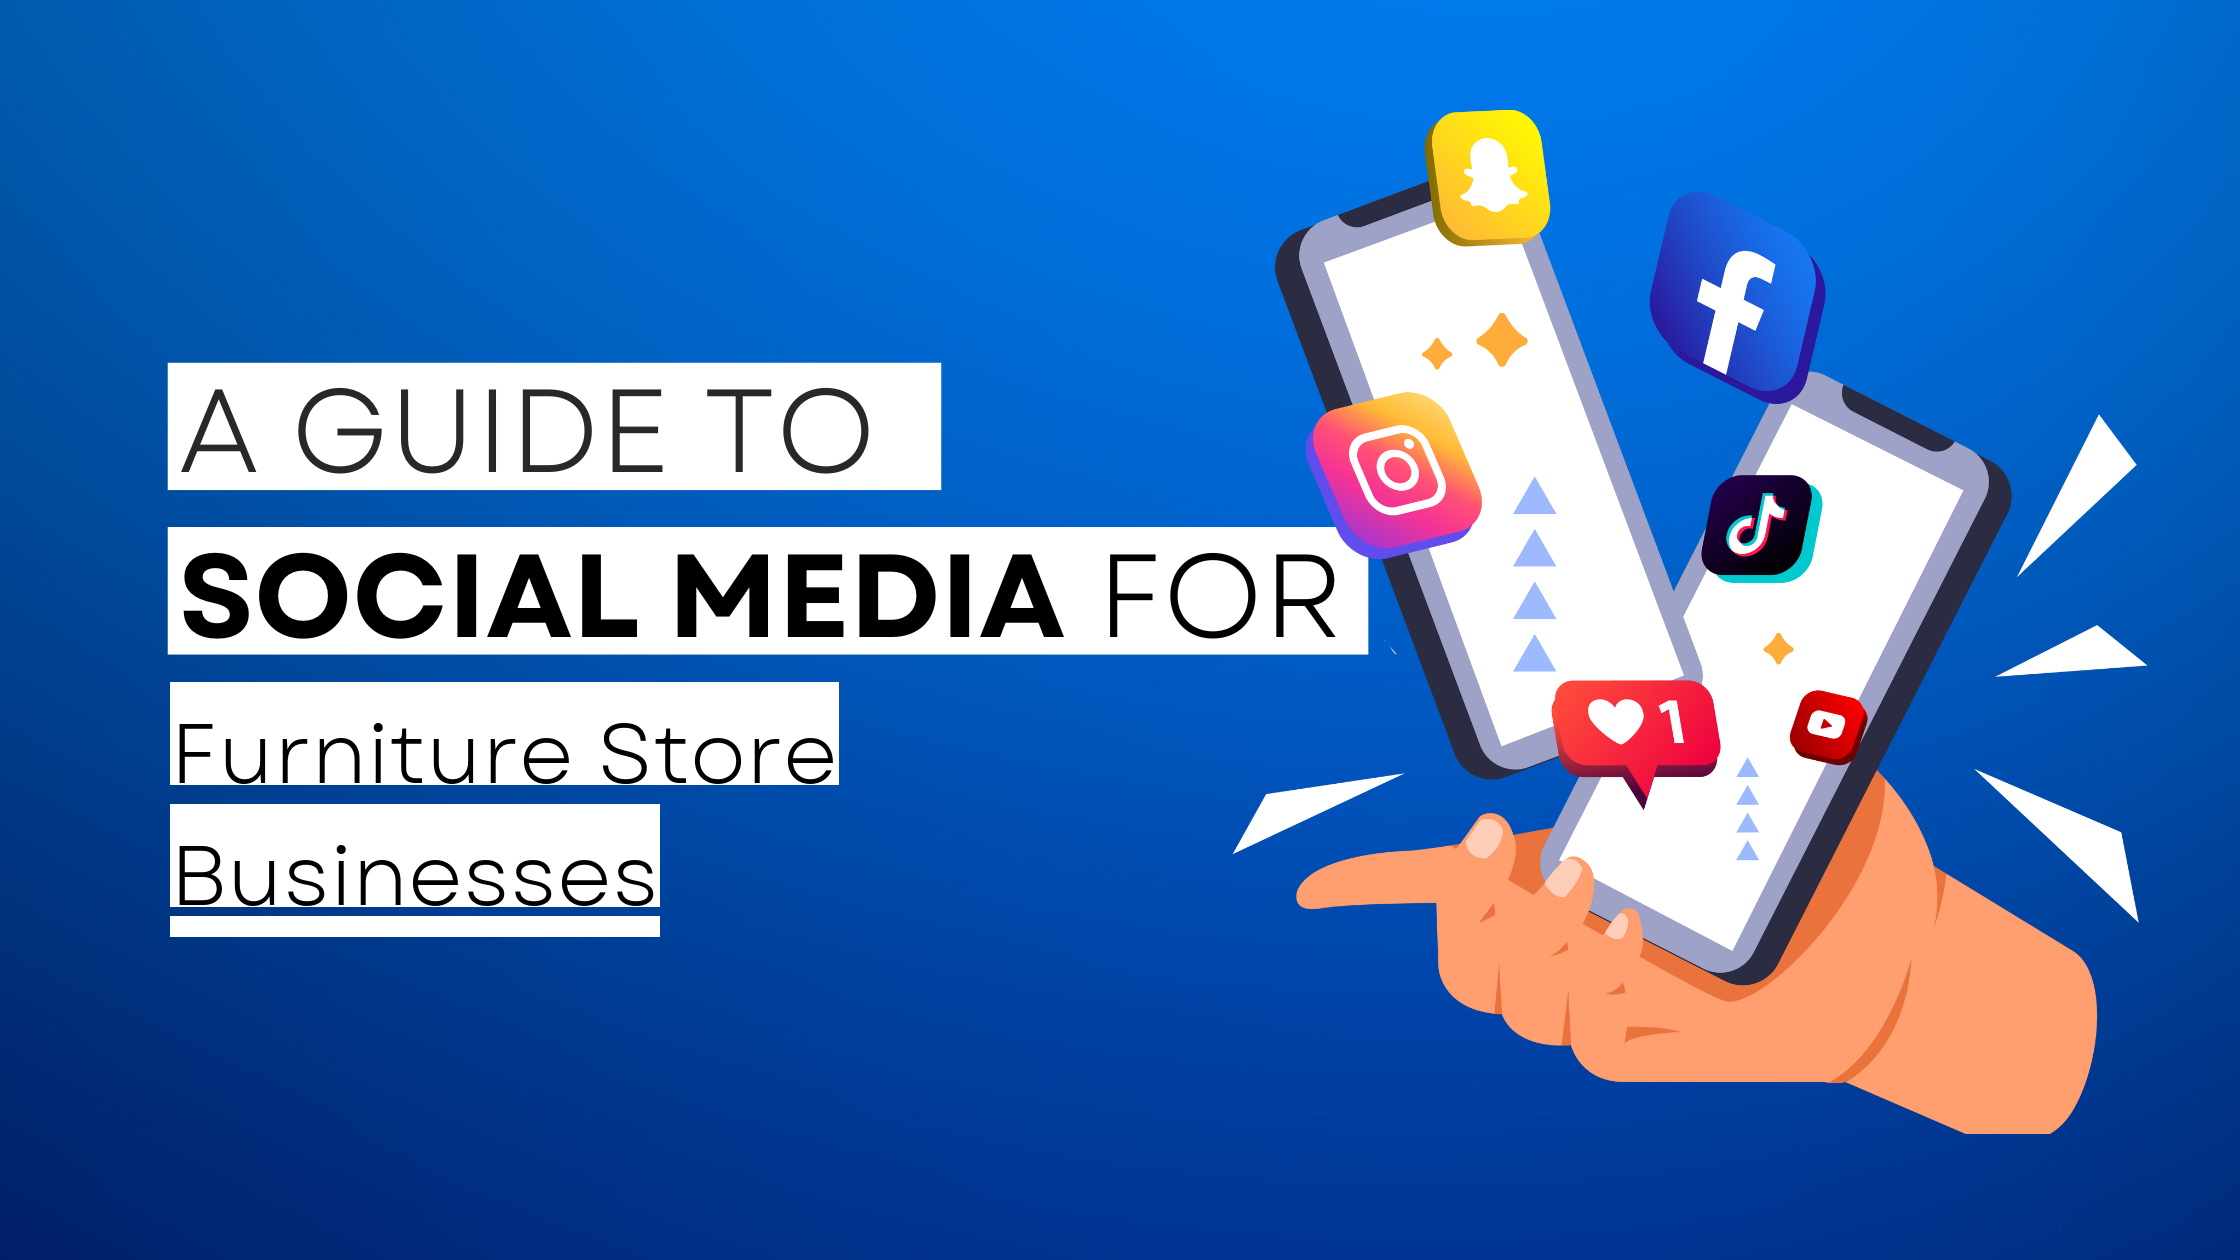 How to start Furniture Store on social media